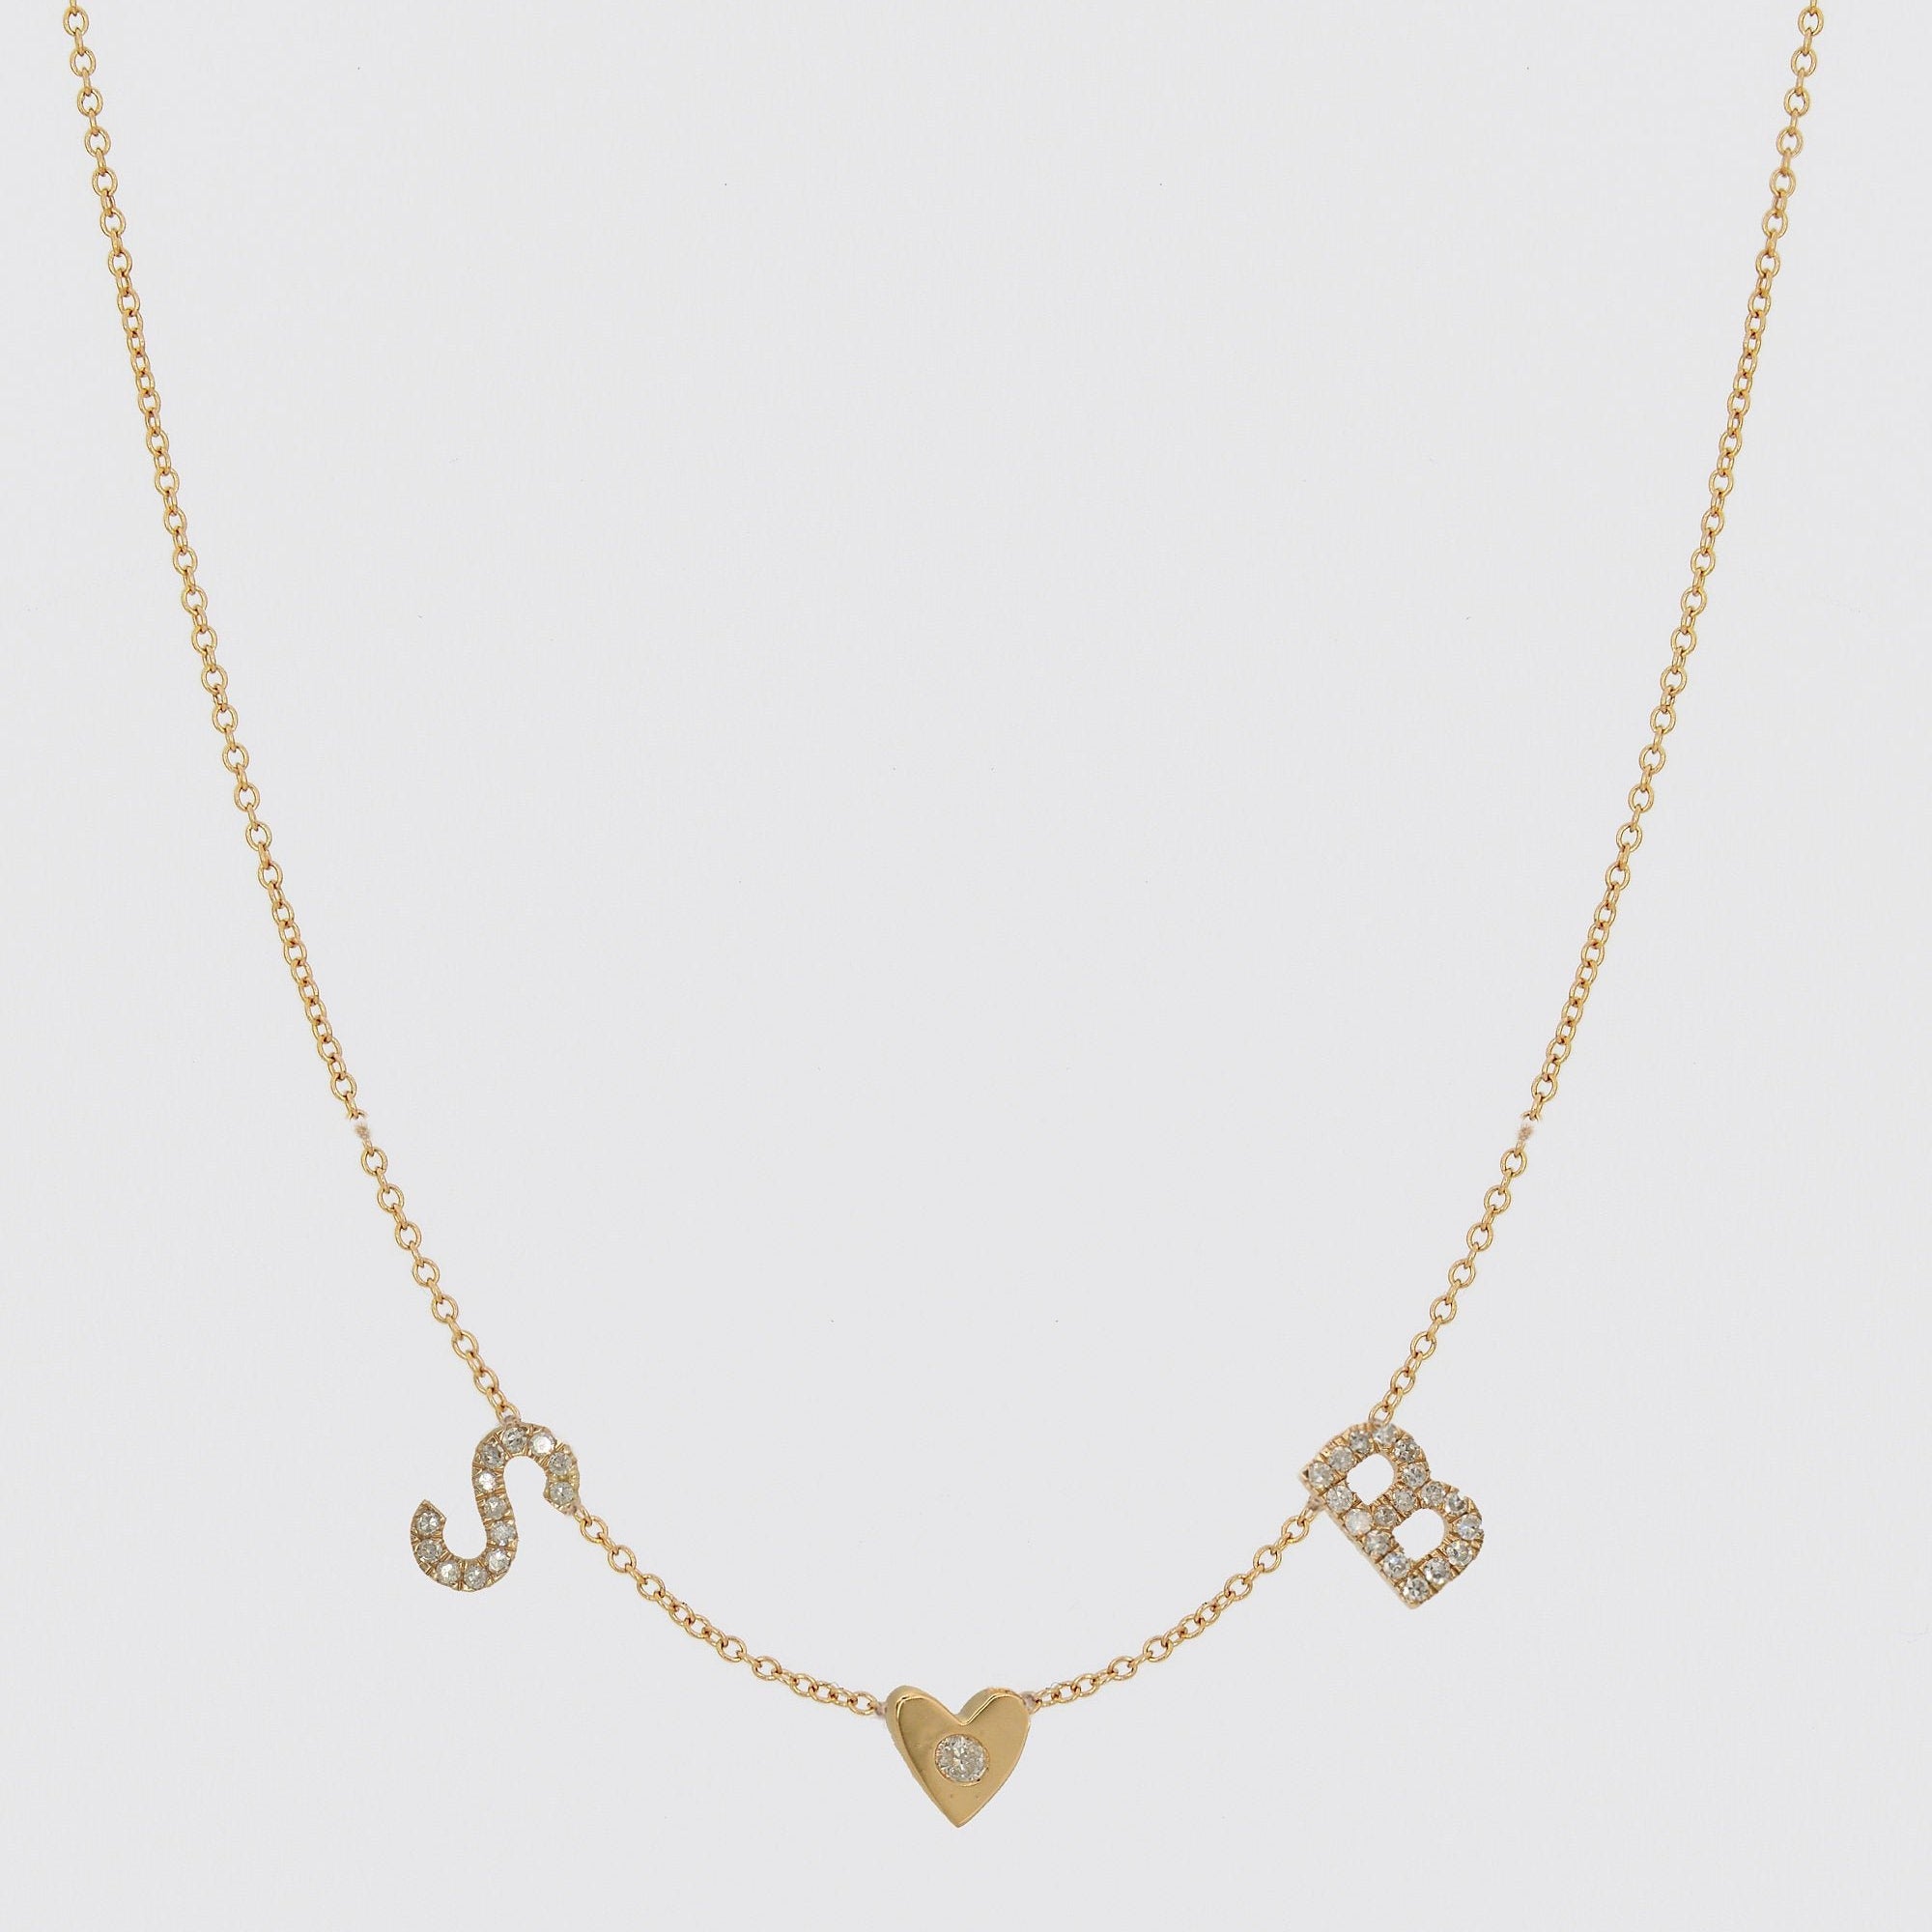 Diamond Initials Necklace with Heart, Alphabet Letter Necklace